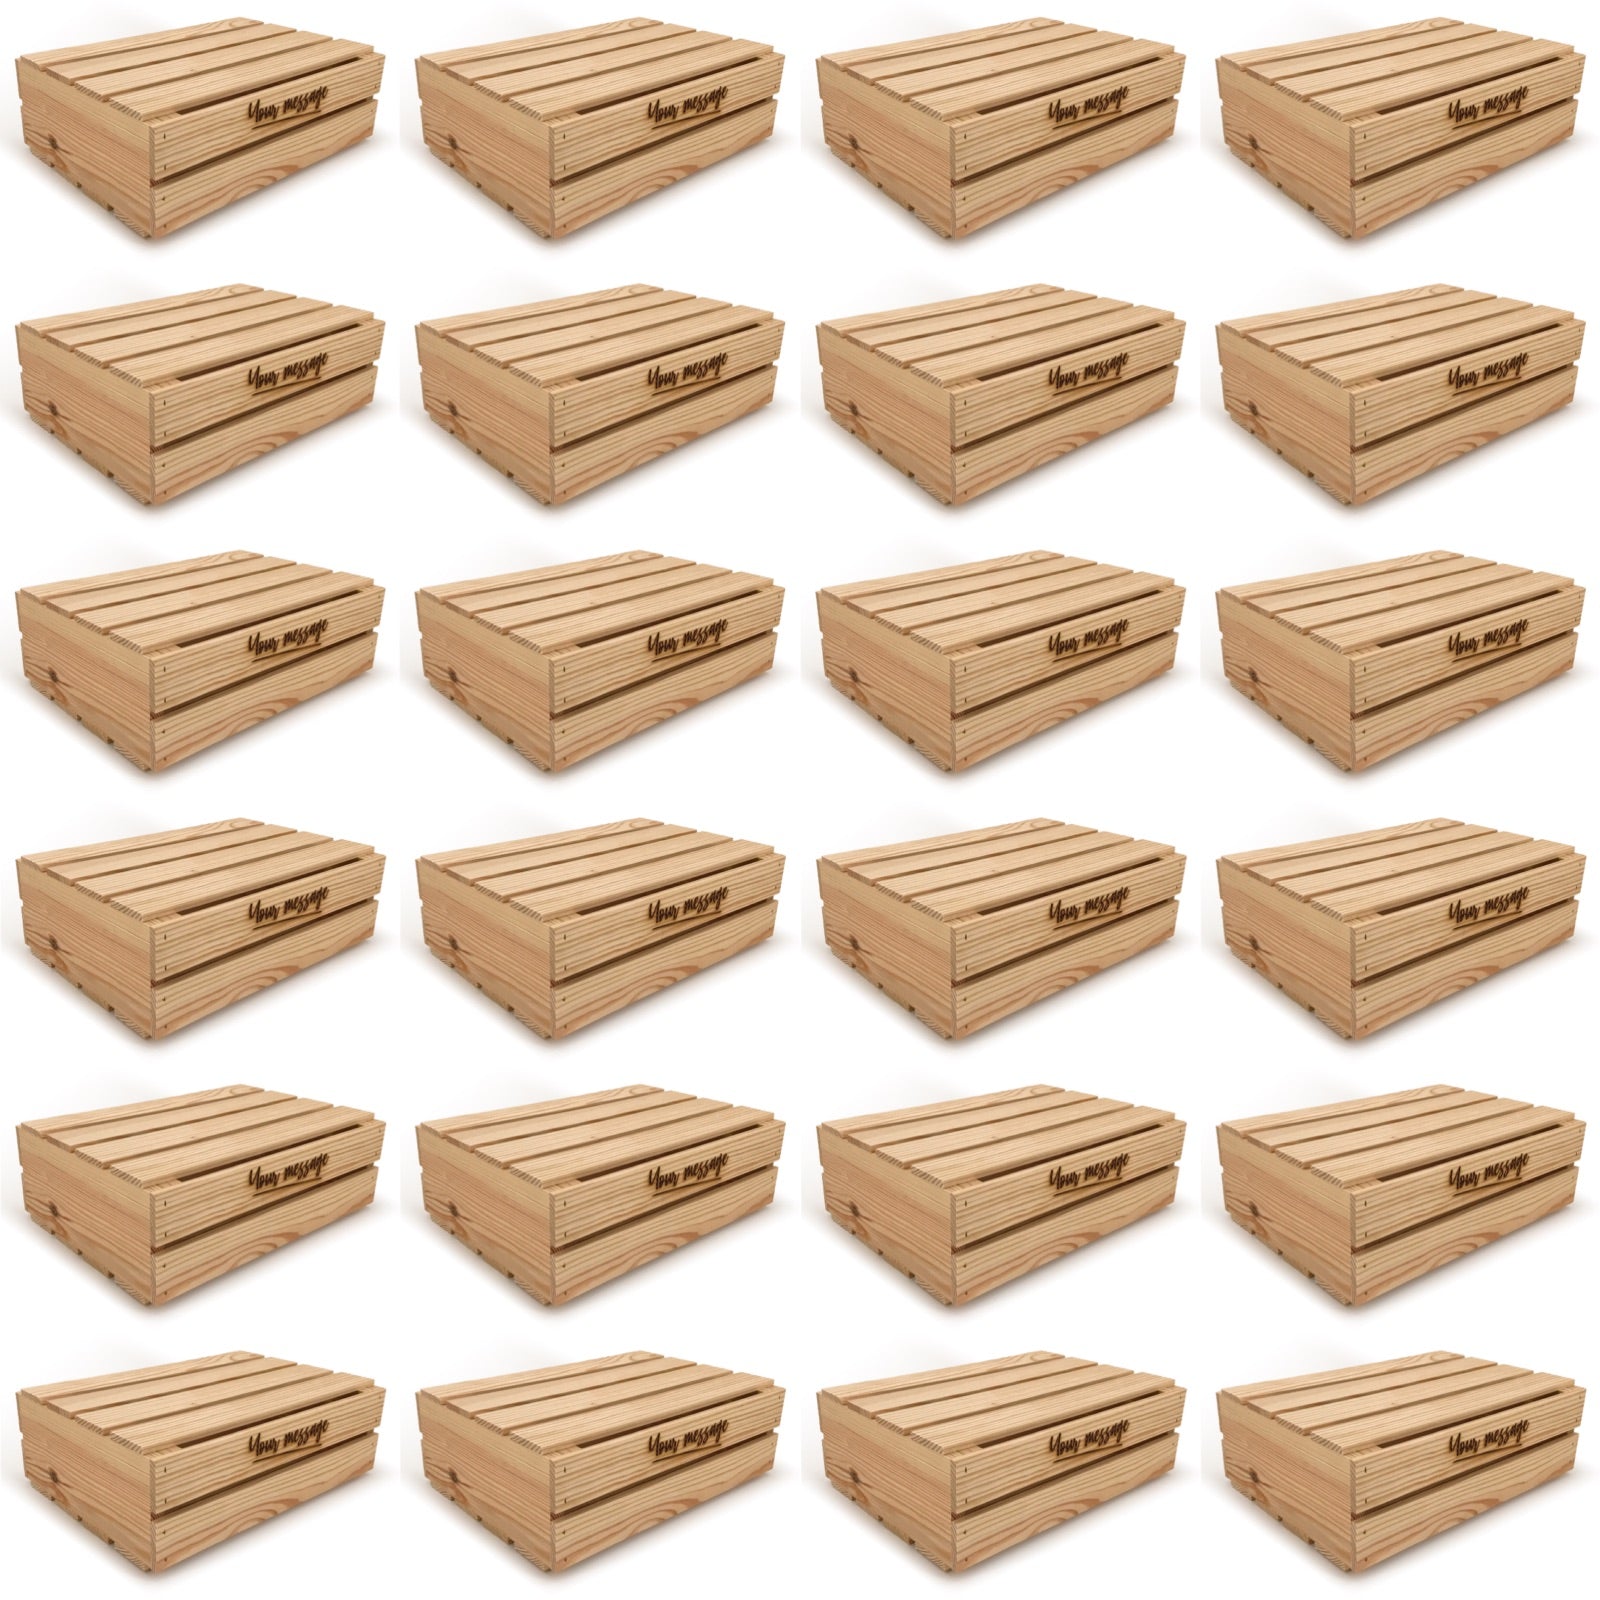 24 Small wooden crates with lid and custom message 16x12x5.25, 6-WS-16-12-5.25-ST-NW-LL, 12-WS-16-12-5.25-ST-NW-LL, 24-WS-16-12-5.25-ST-NW-LL, 48-WS-16-12-5.25-ST-NW-LL, 96-WS-16-12-5.25-ST-NW-LL